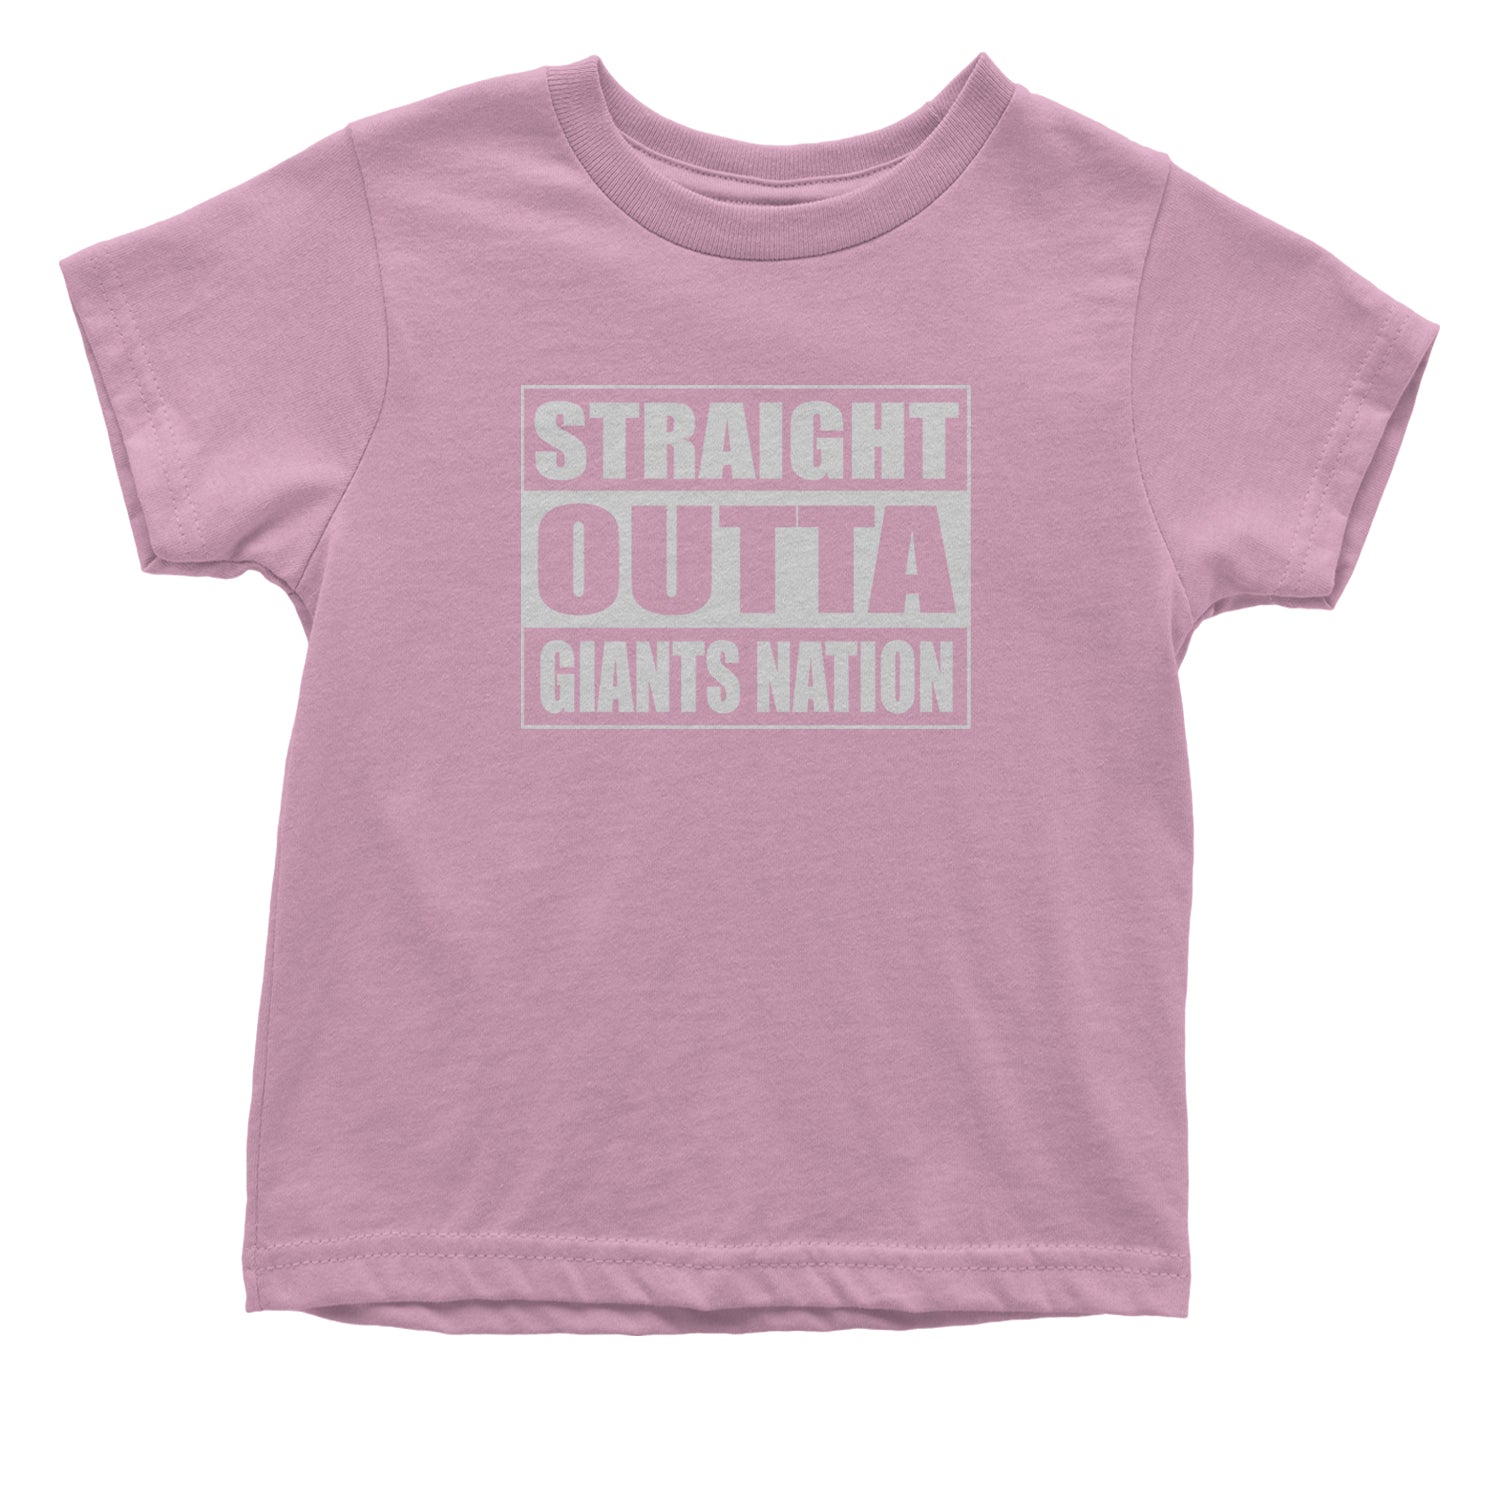 Straight Outta Giants Nation Infant One-Piece Romper Bodysuit and Toddler T-shirt bleed, blue, football, giants, new, ny, york by Expression Tees